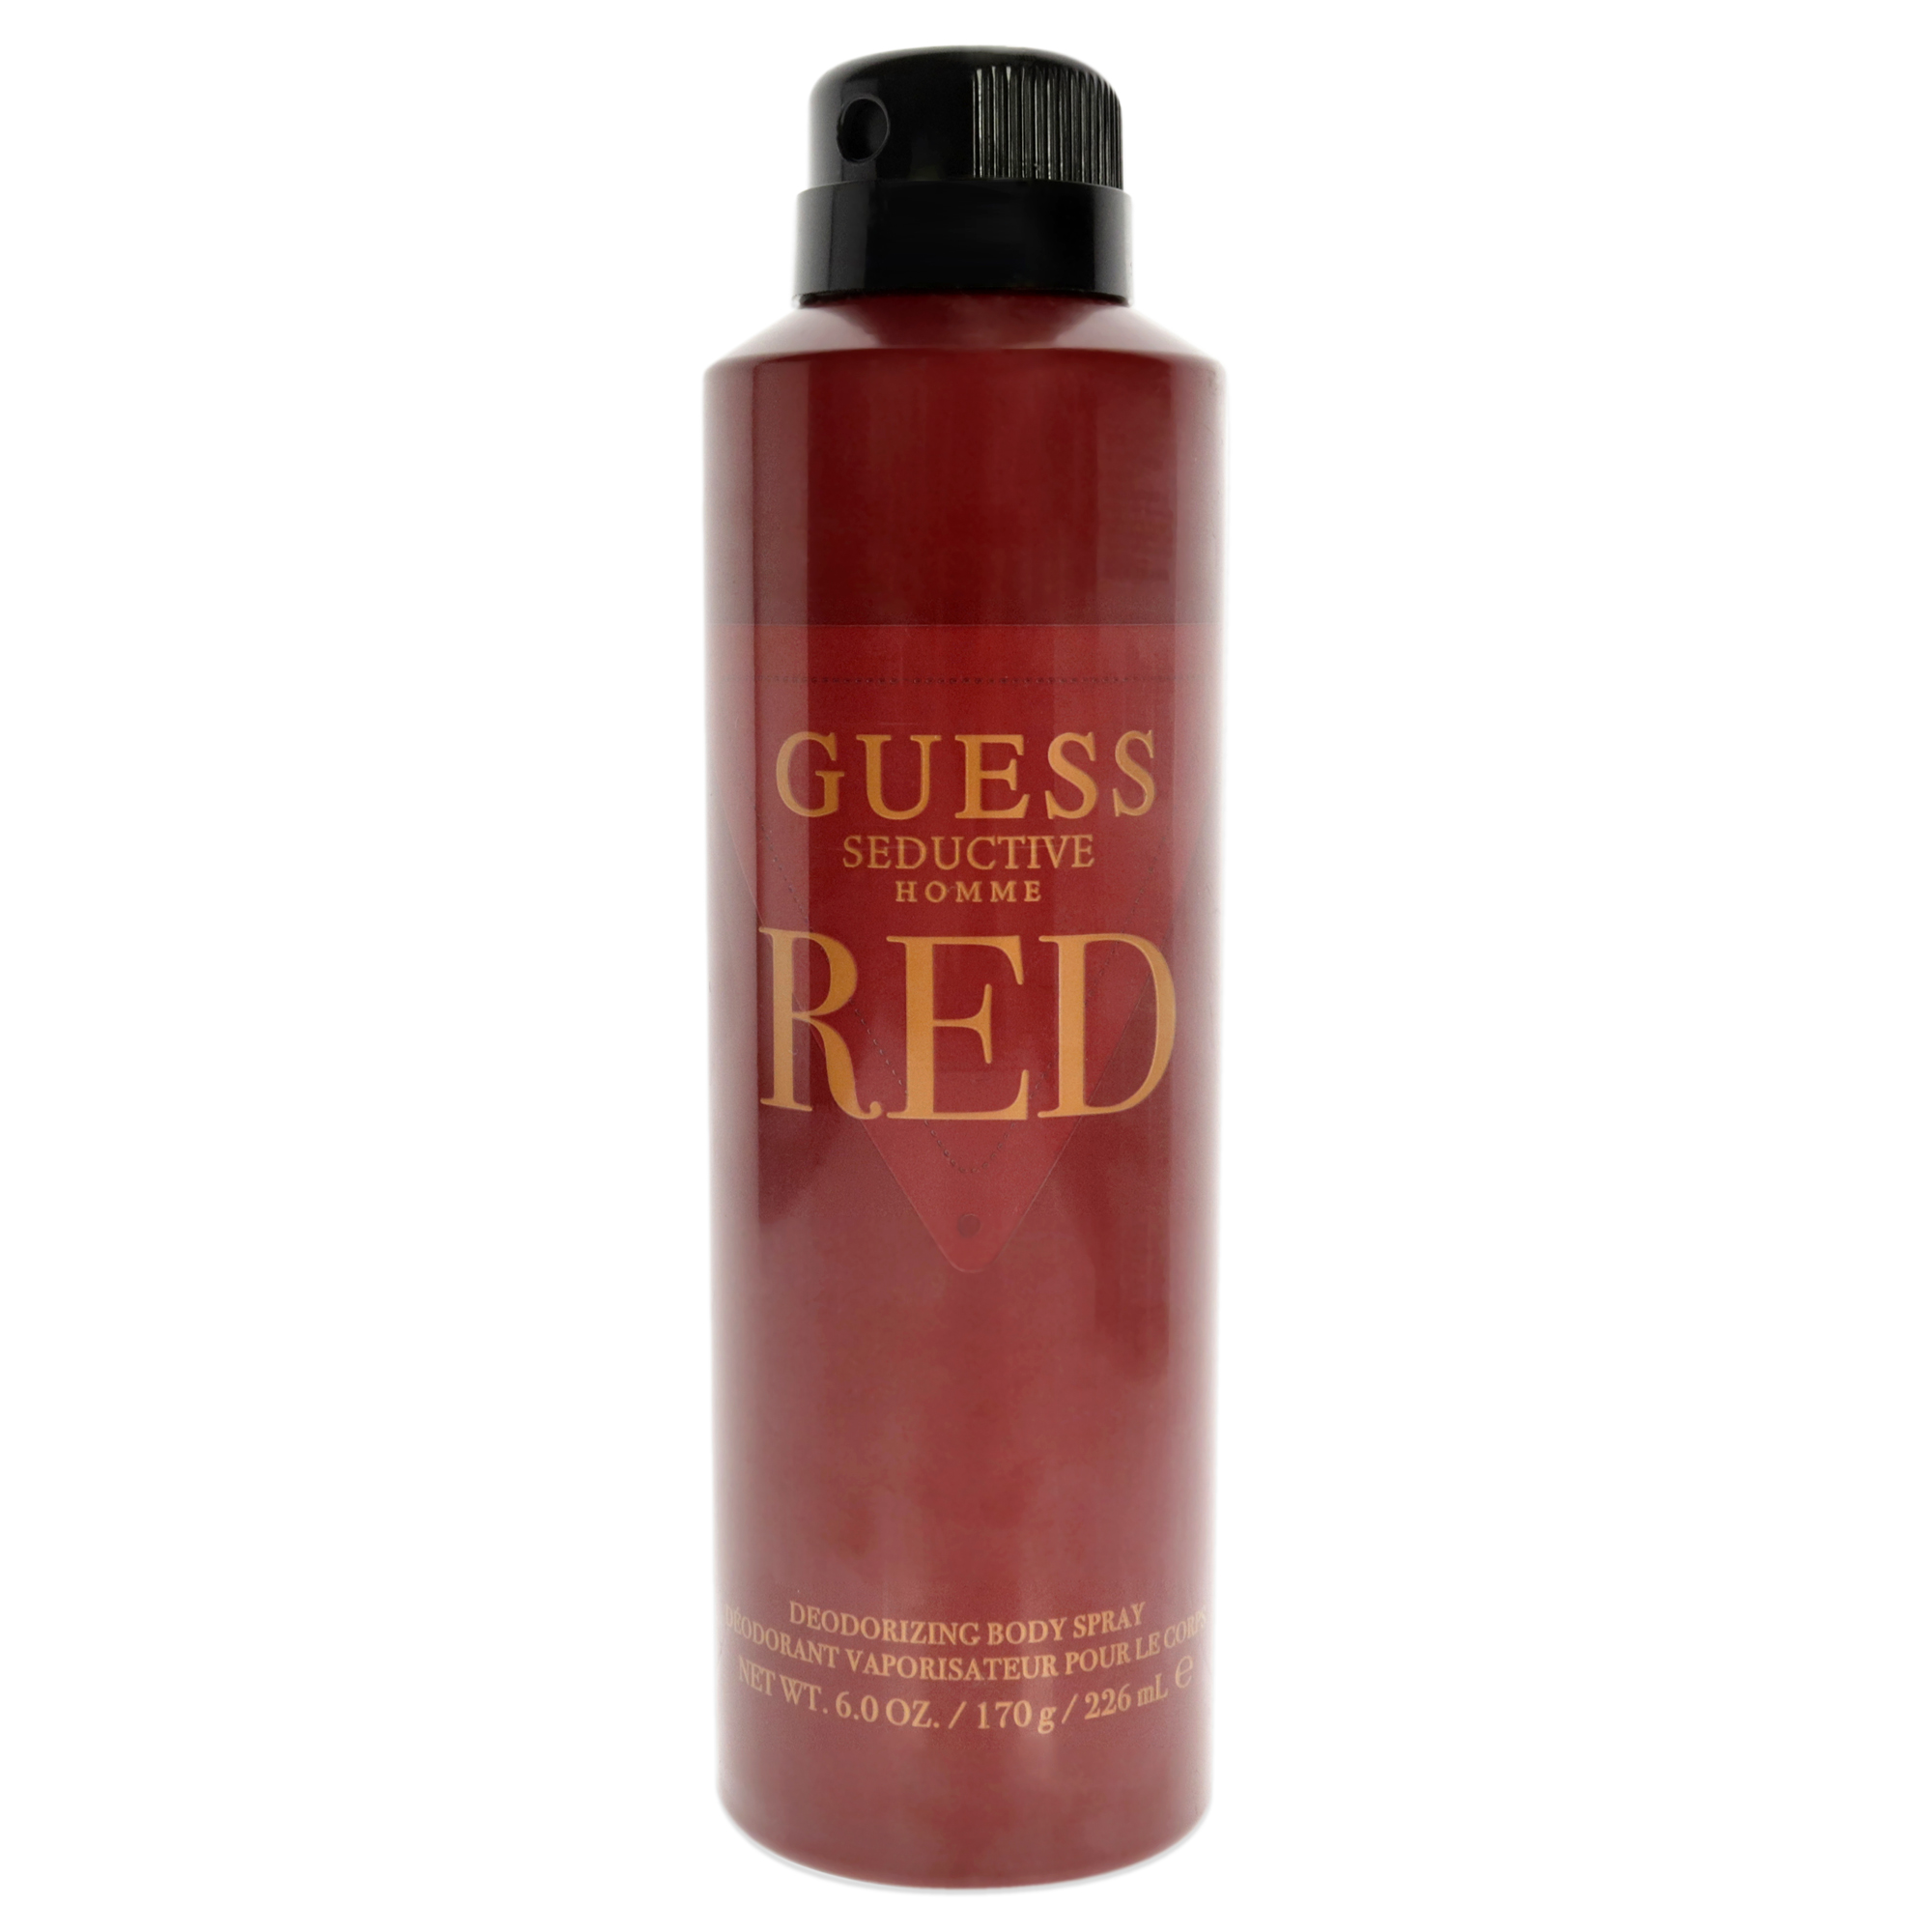 Guess Seductive Homme Red by Guess for Men - 6 oz Body Spray